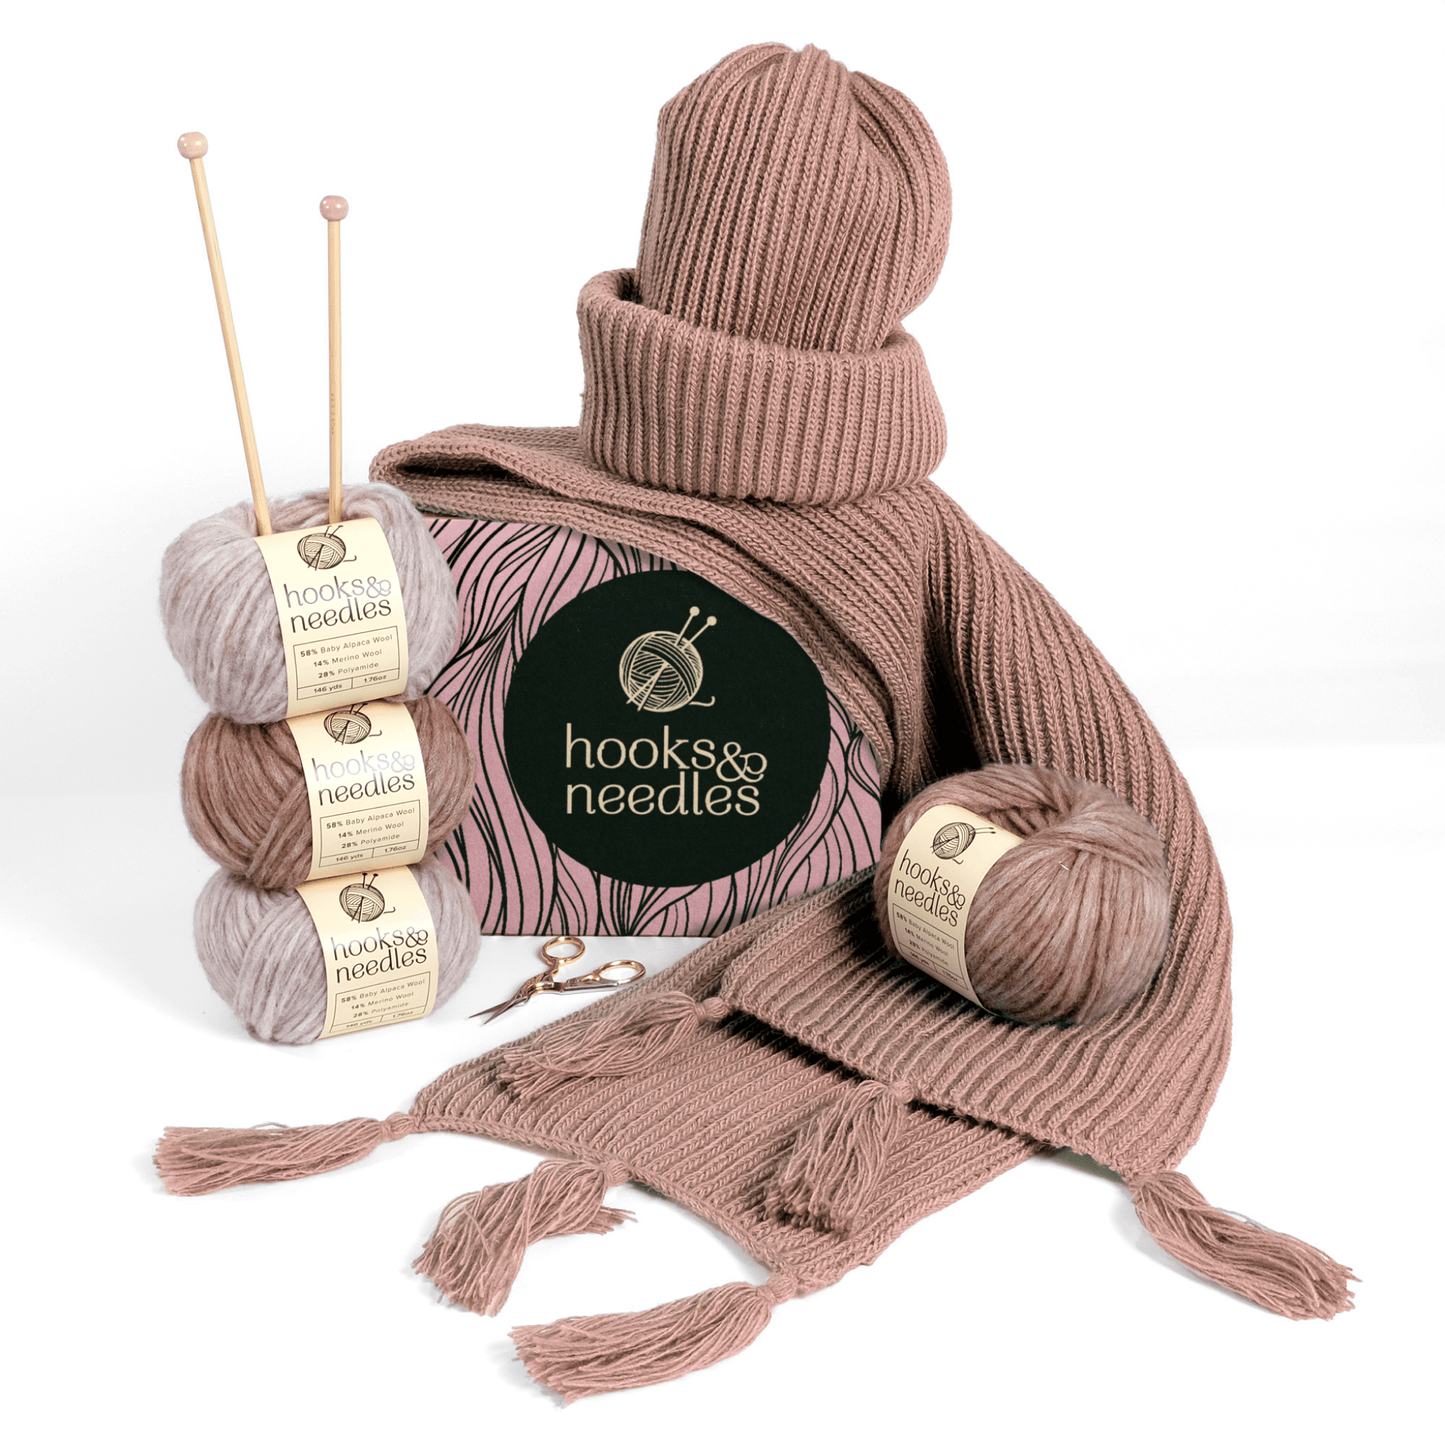 Knitting supplies including yarn balls, wooden needles, and a finished scarf and hat set in dusty pink, displayed against a white background.